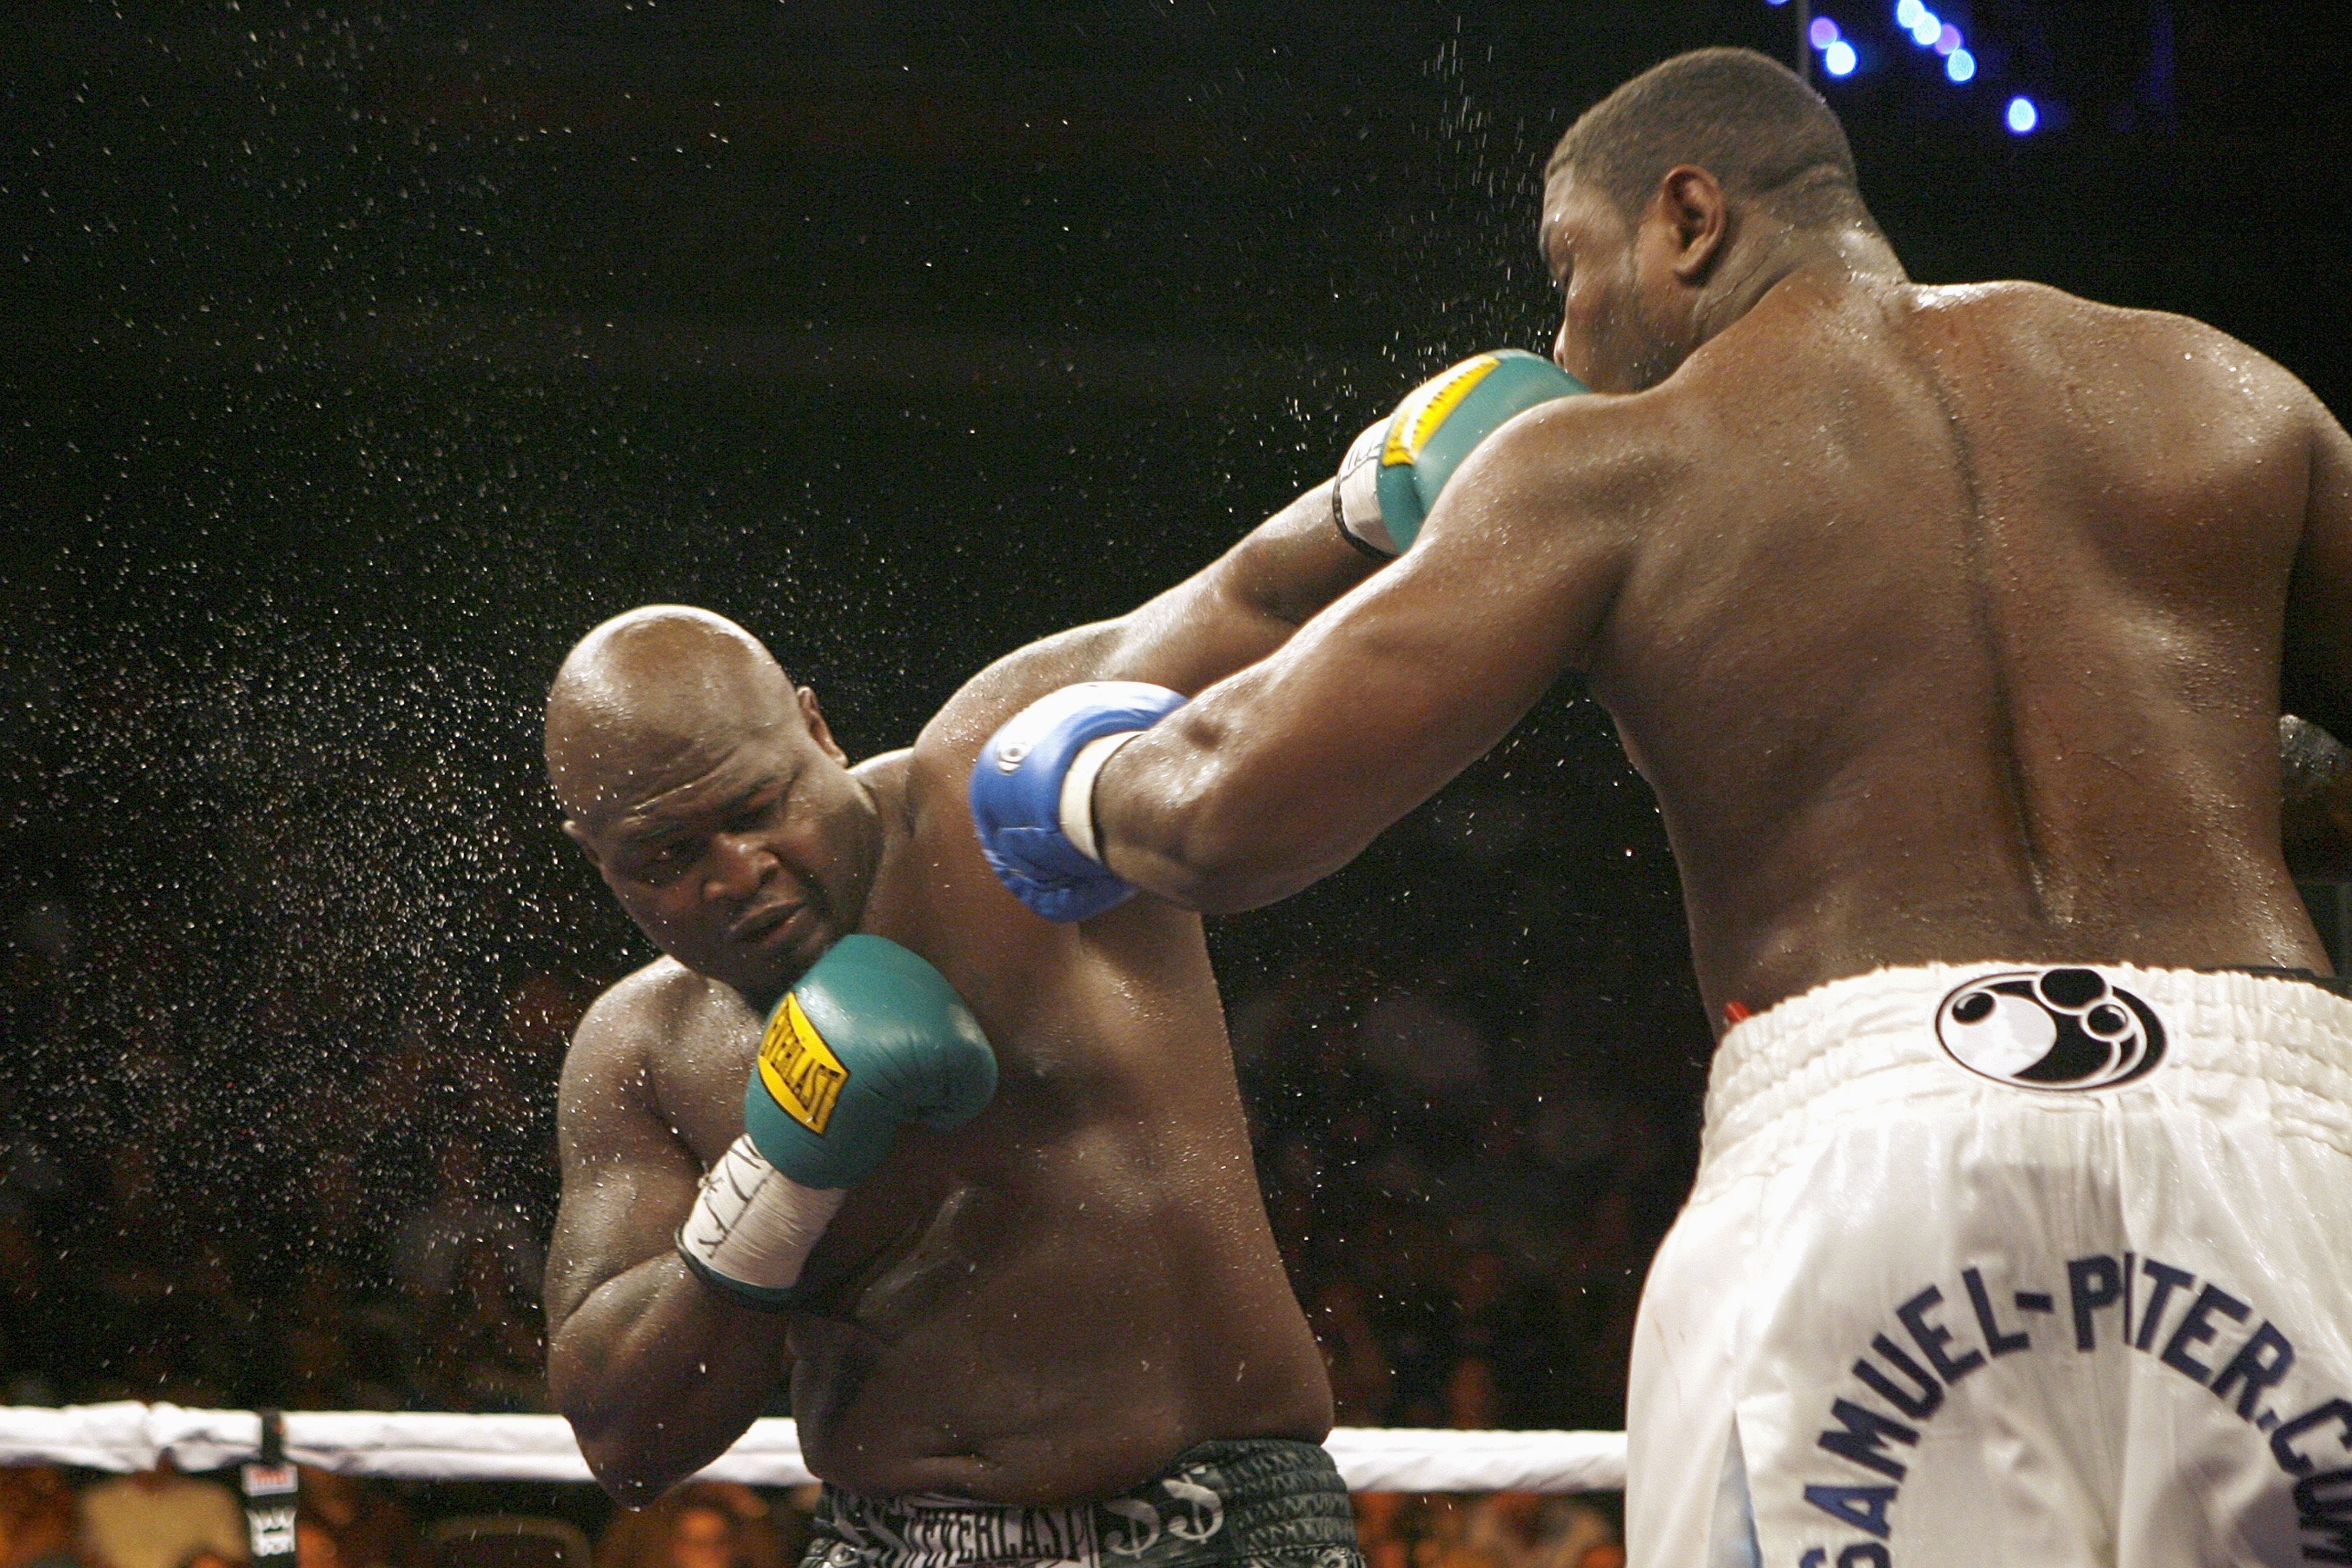 Roy Jones Jr produced one of the most terrifying knockouts in boxing history